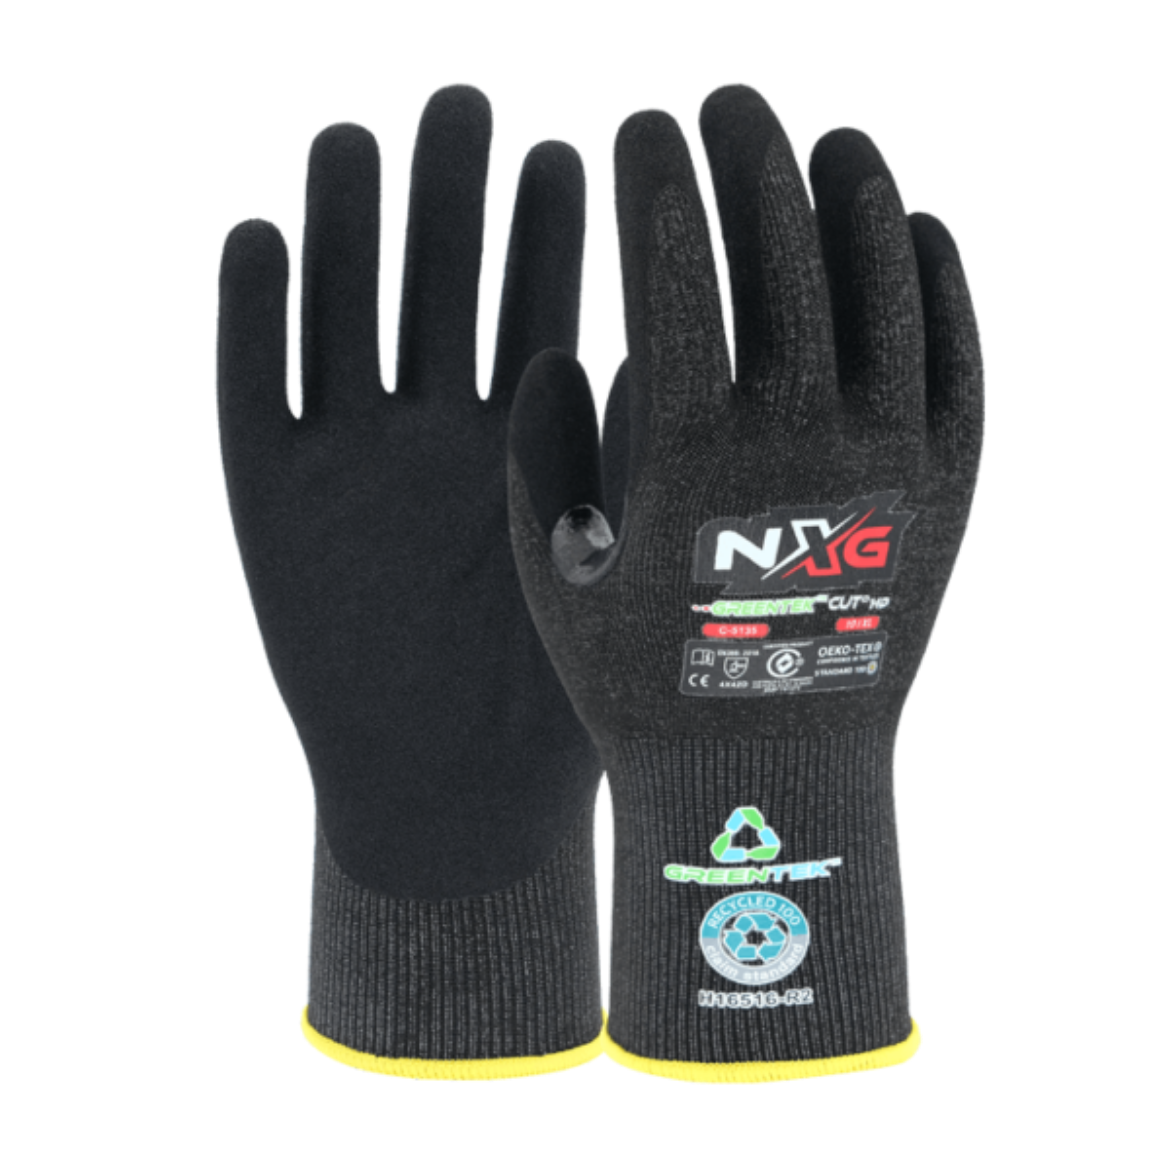 Picture of GLOVES, NXG GREENTEK CUT D HD. AVAILABLE IN SIZES 6 – 12